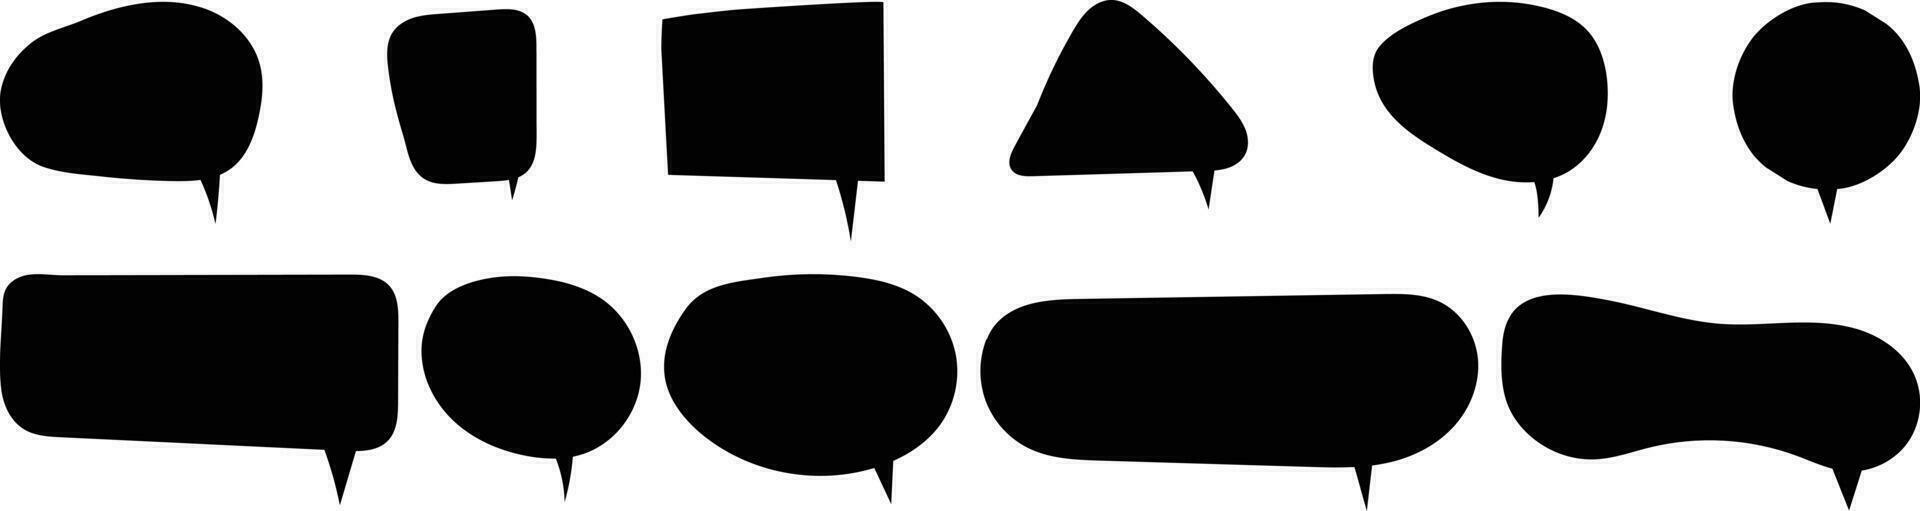 Simple Hand Drawn Callout Shapes or Chat Bubbles vector